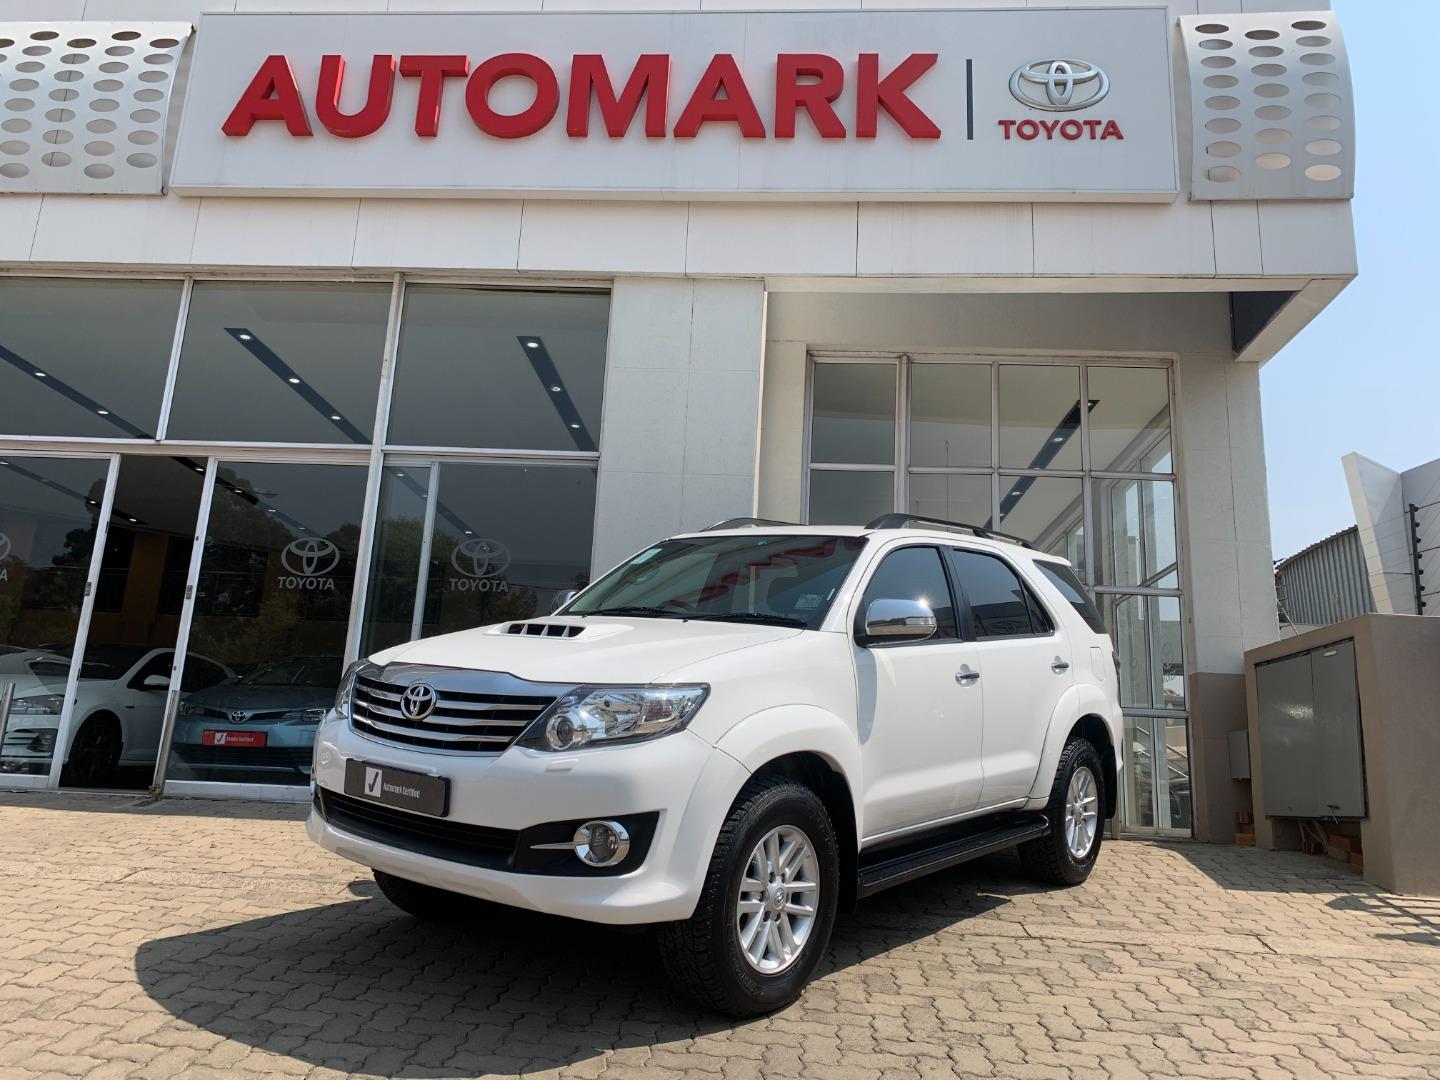 2013 Toyota Fortuner Ltd Edition 3.0 D-4D 4X4 At for sale - 343377